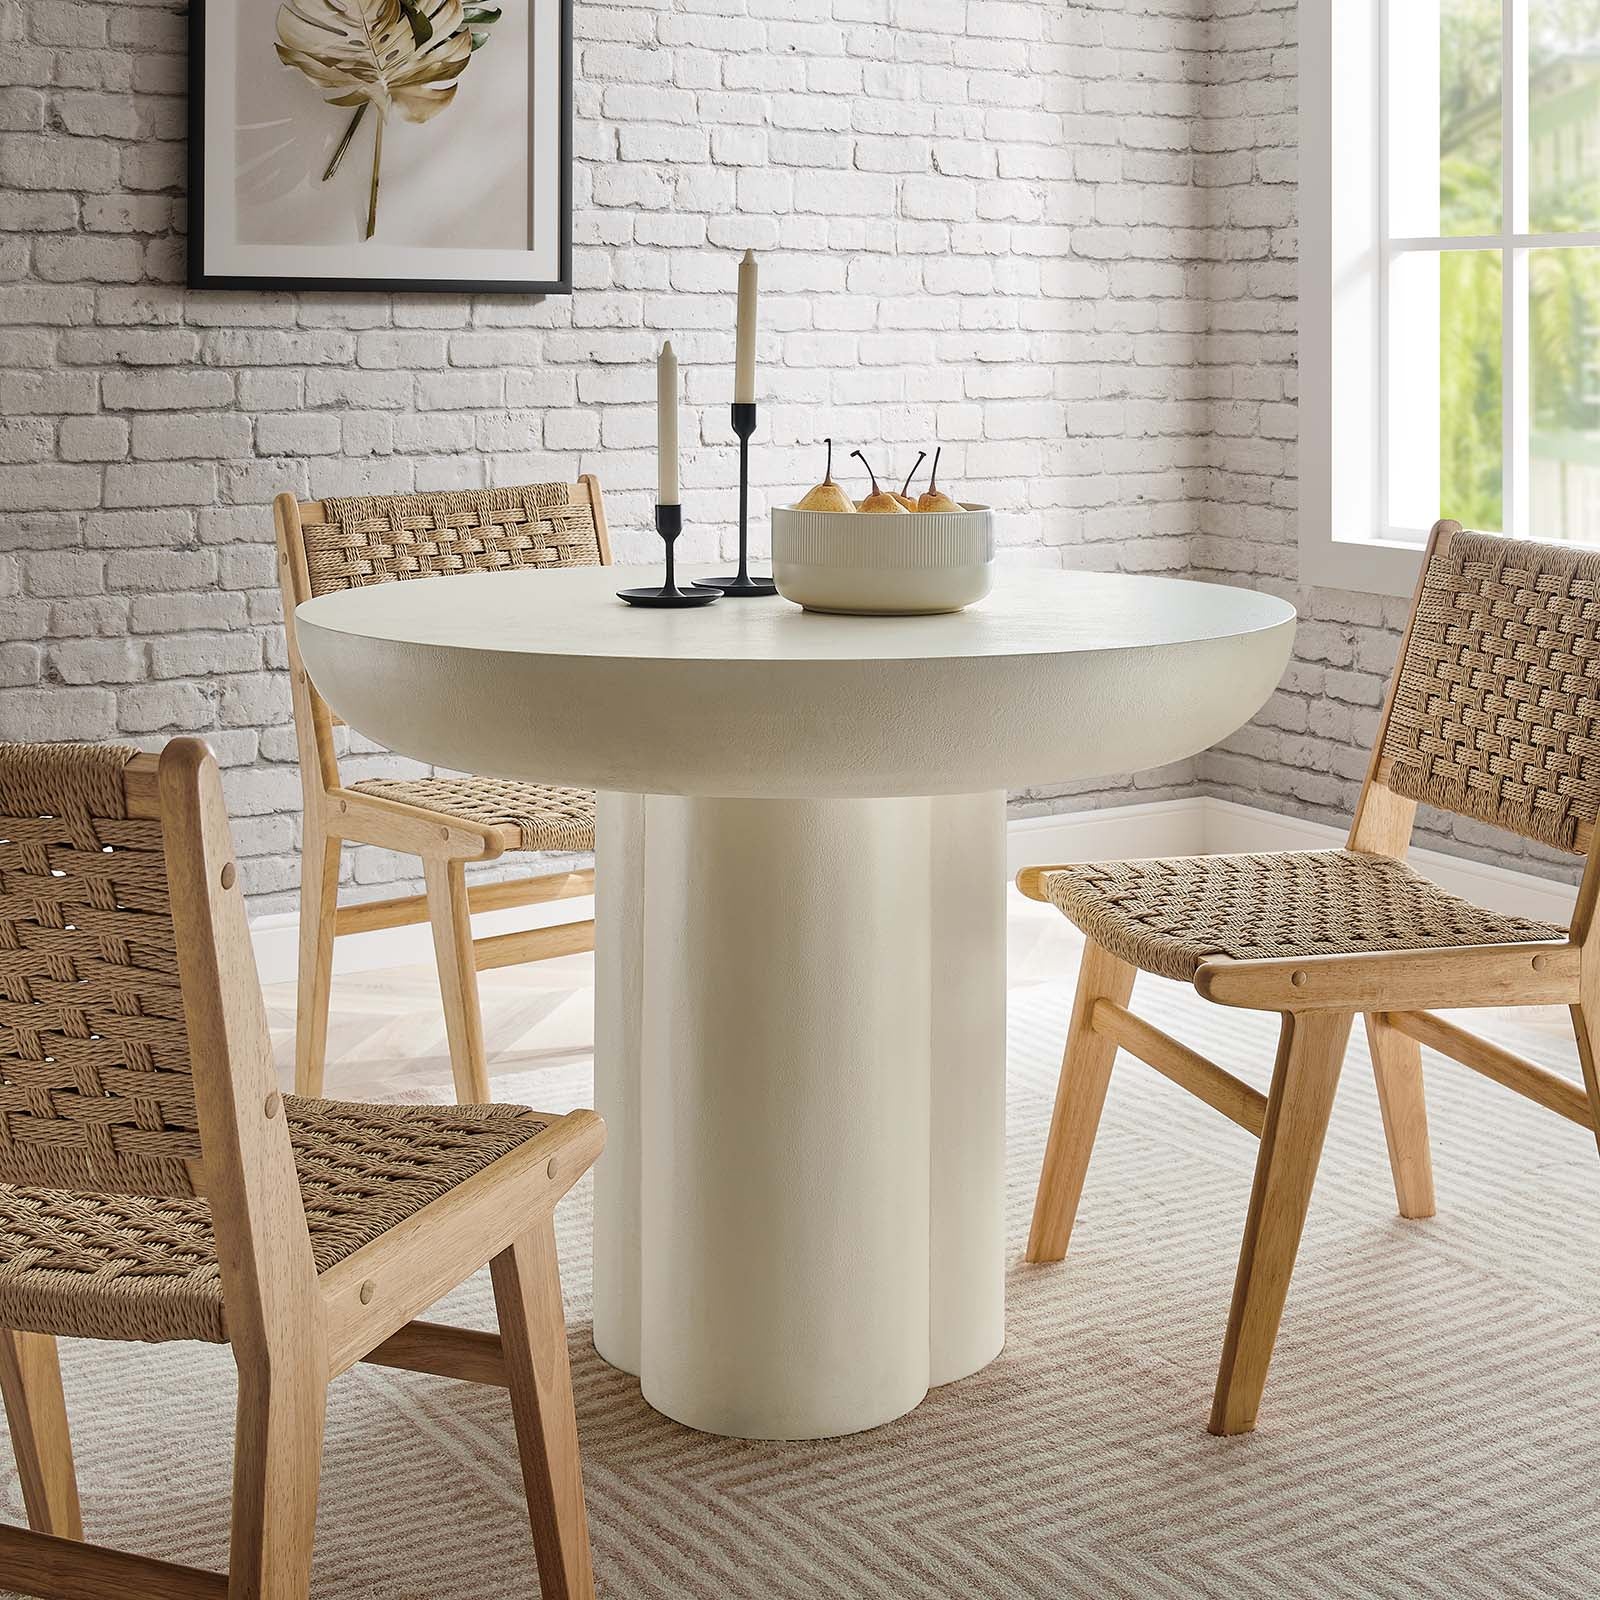 Caspian 40" Round Concrete Dining Table - East Shore Modern Home Furnishings